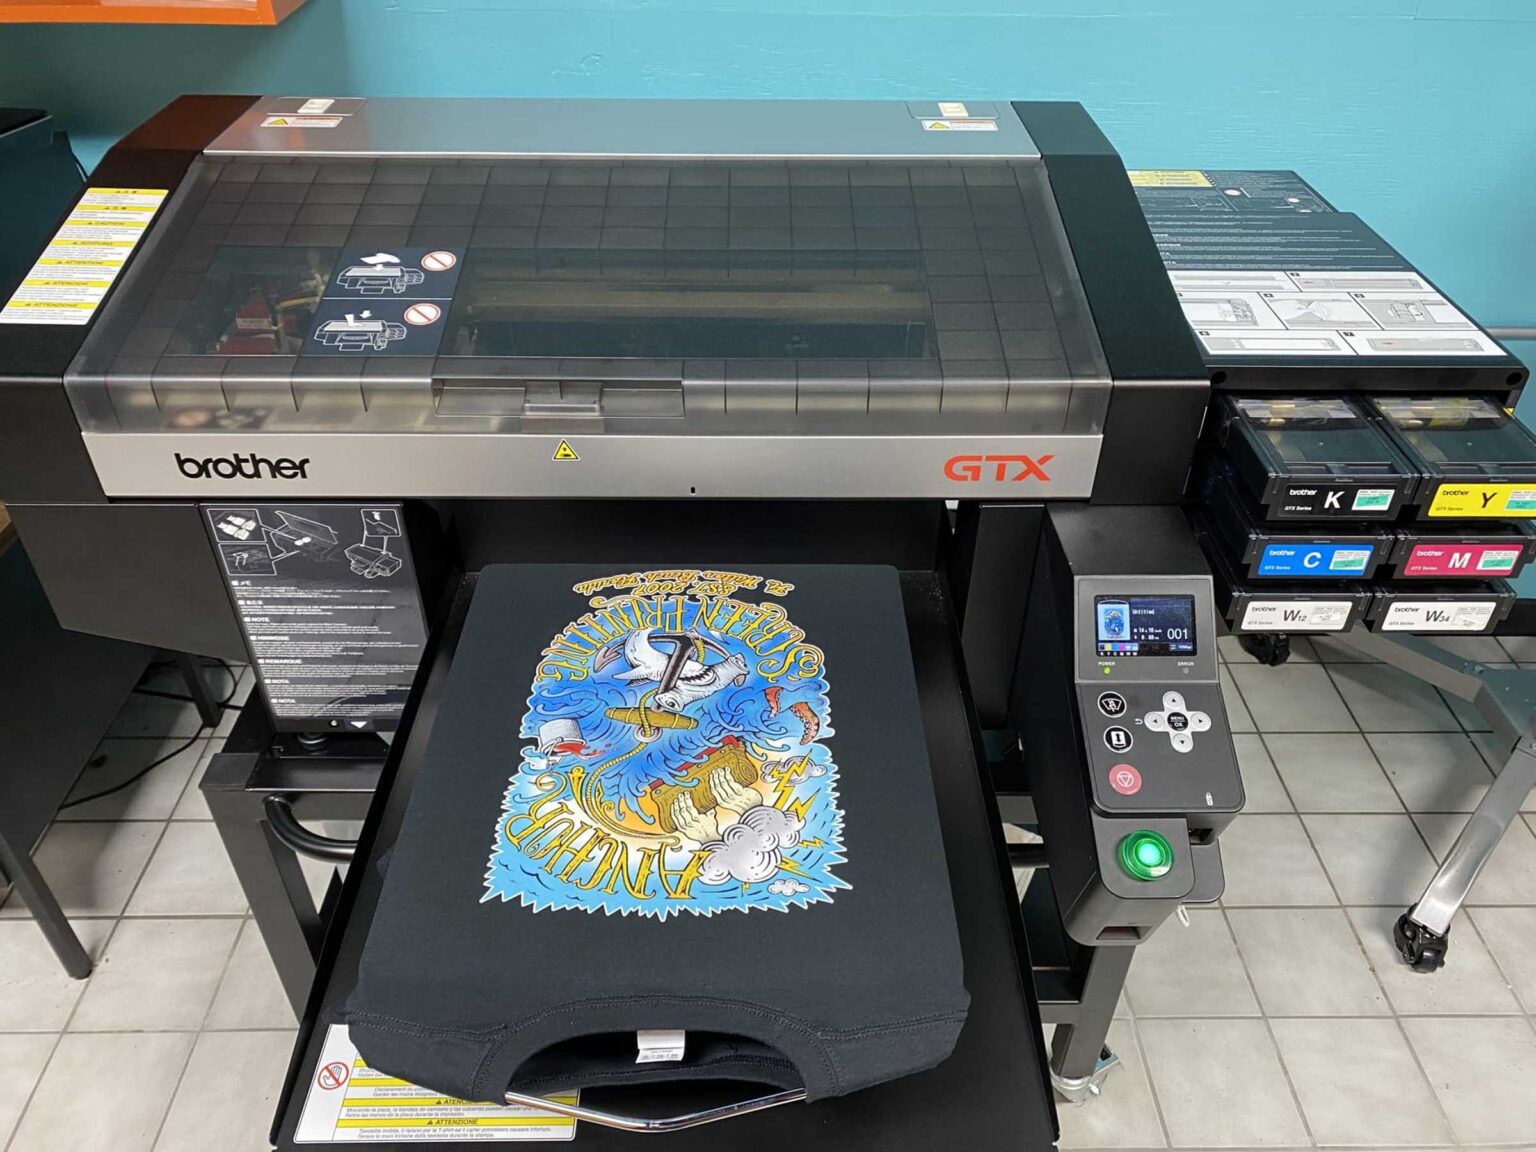 Are you looking for a new printing solution? Check out DTG or Direct-to-Garment! Dive into the details of this revolutionary new printing technology here!